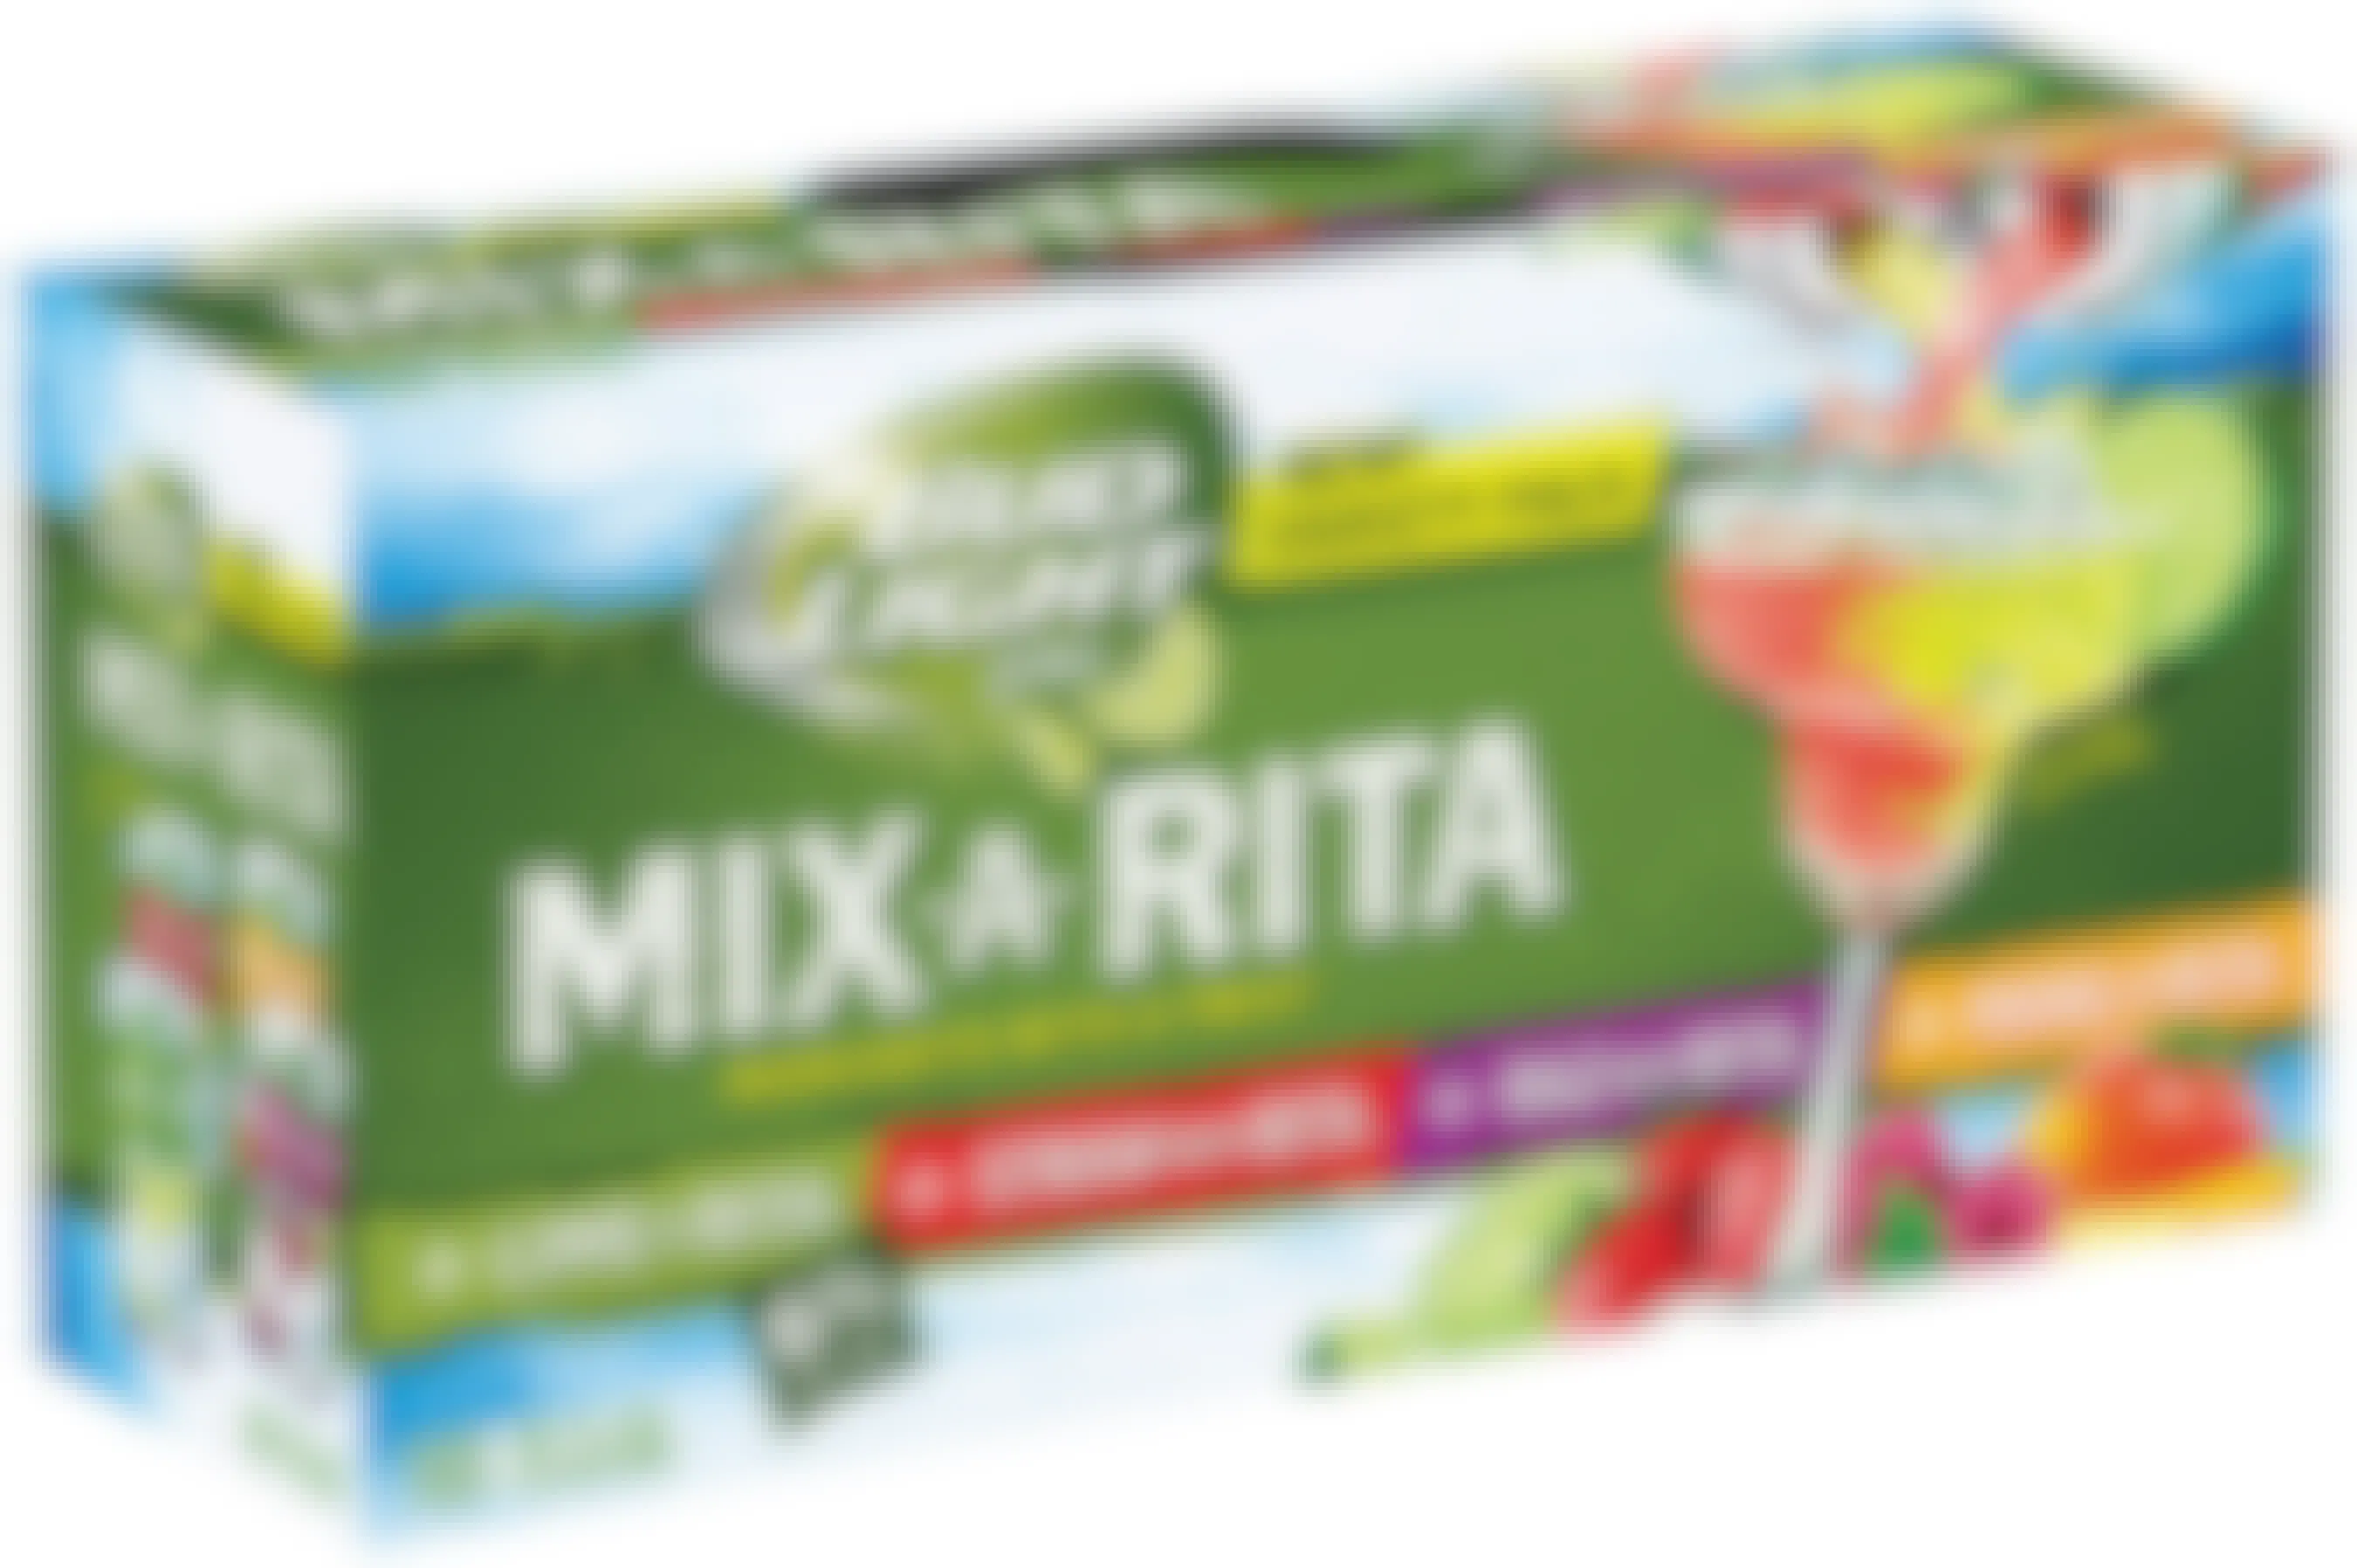 Box of Ritas from Anheuser-Busch Bud Lite, included in the Lime-a-Rita settlement